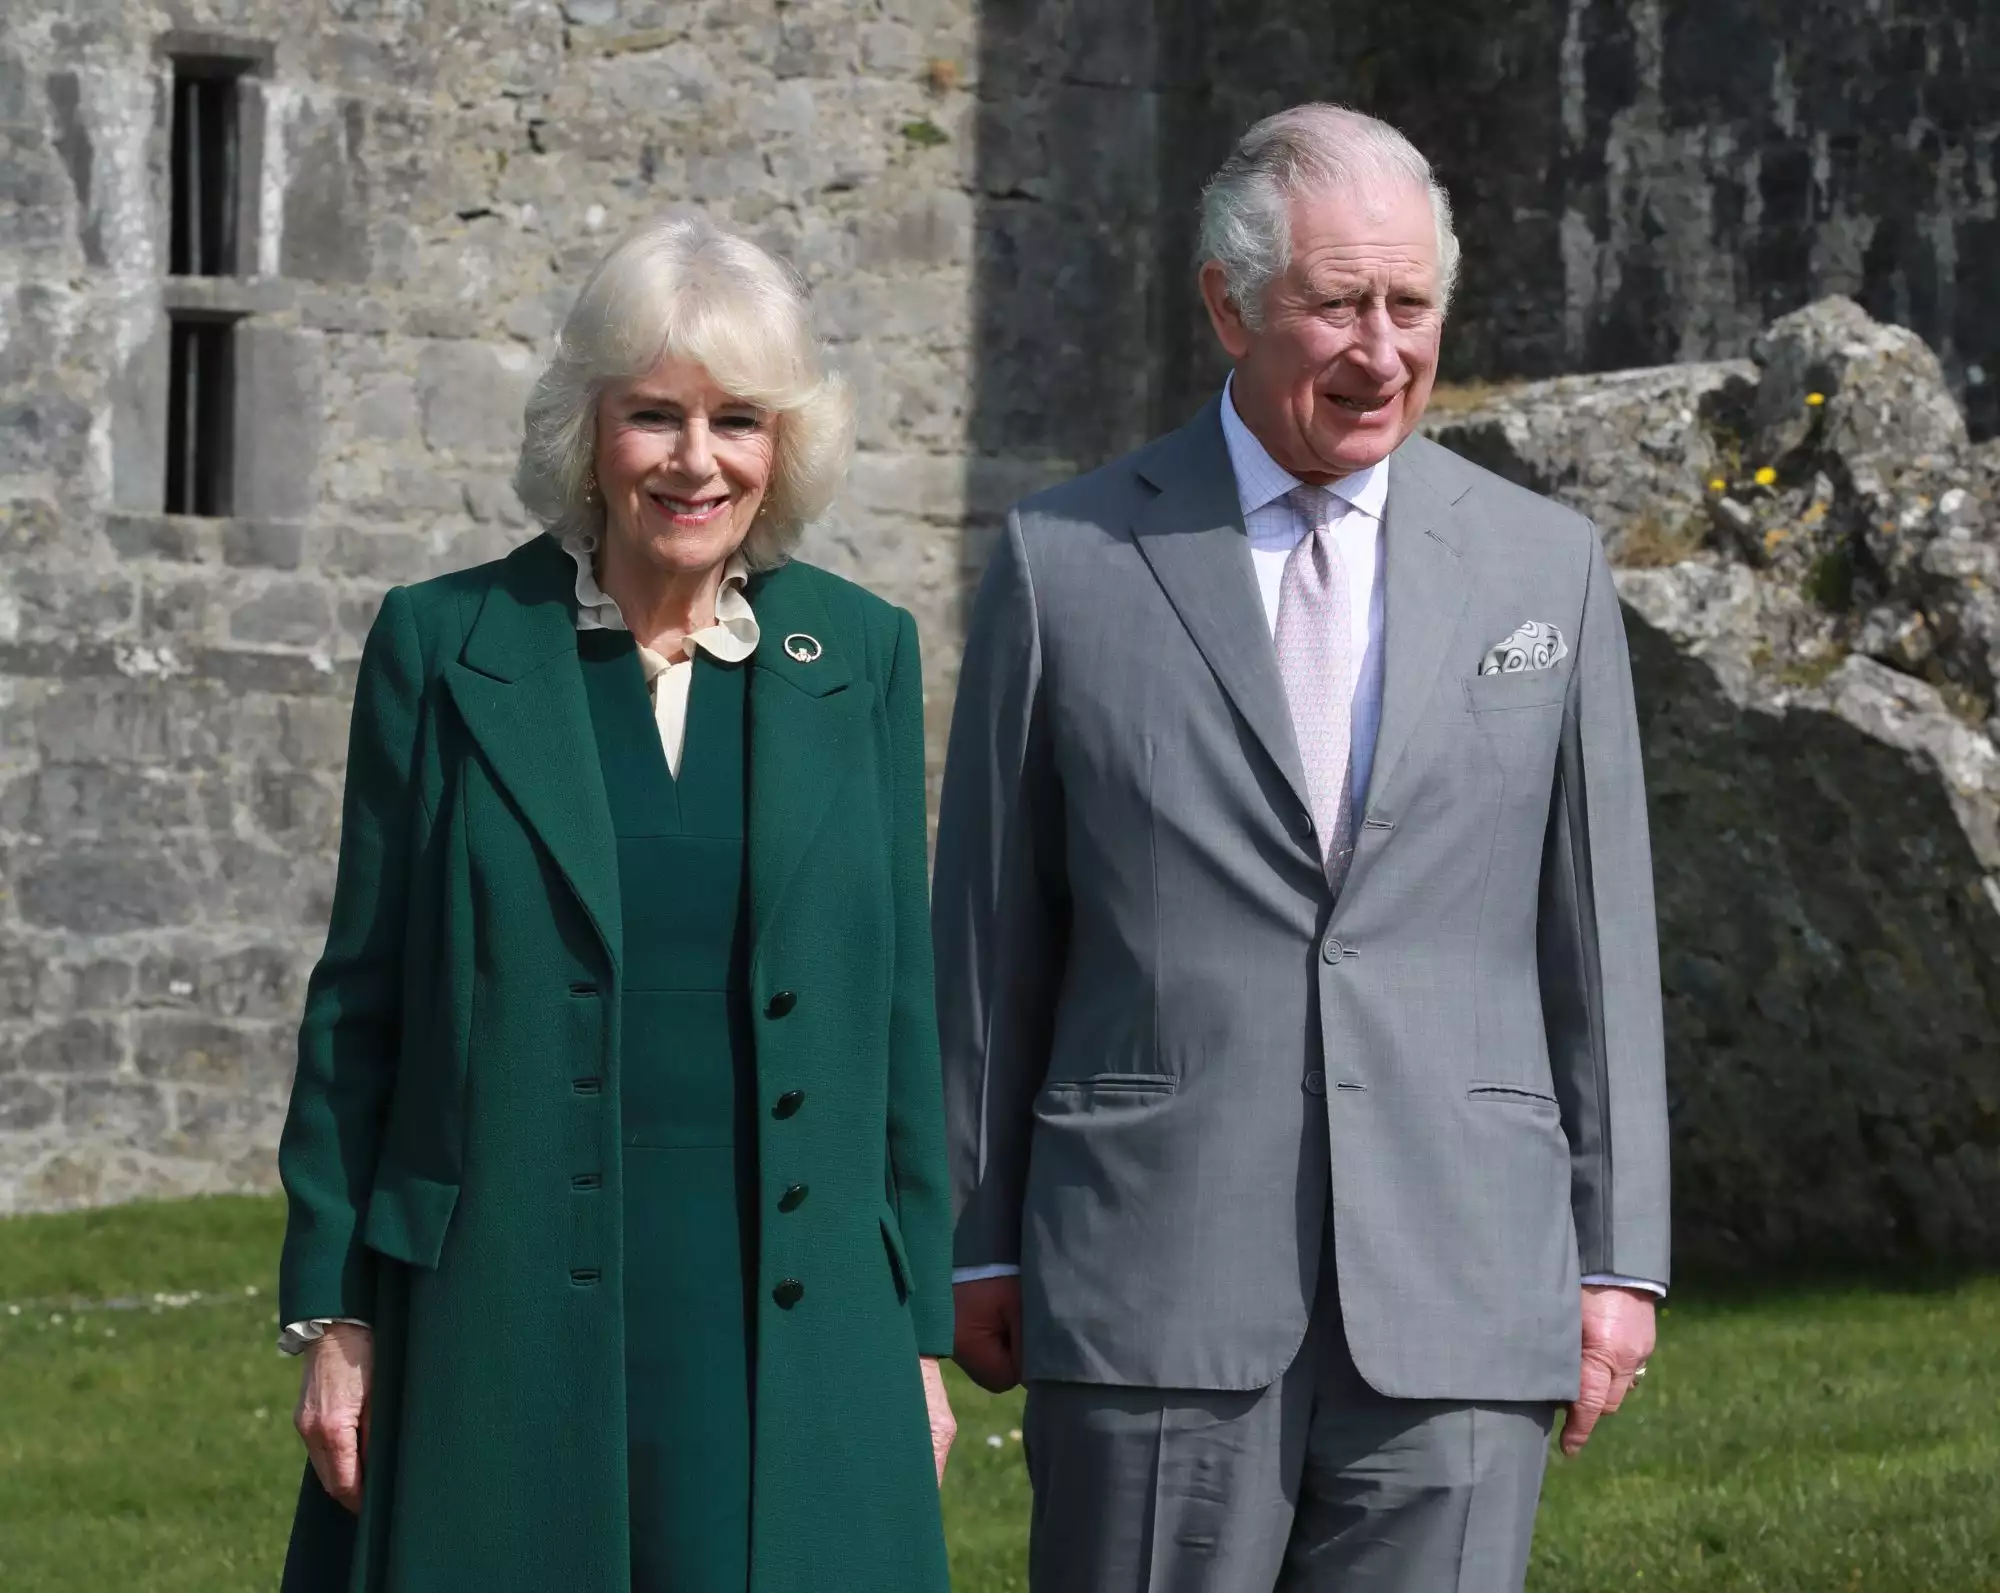 Prince of Wales, Charles Is The New King Of England